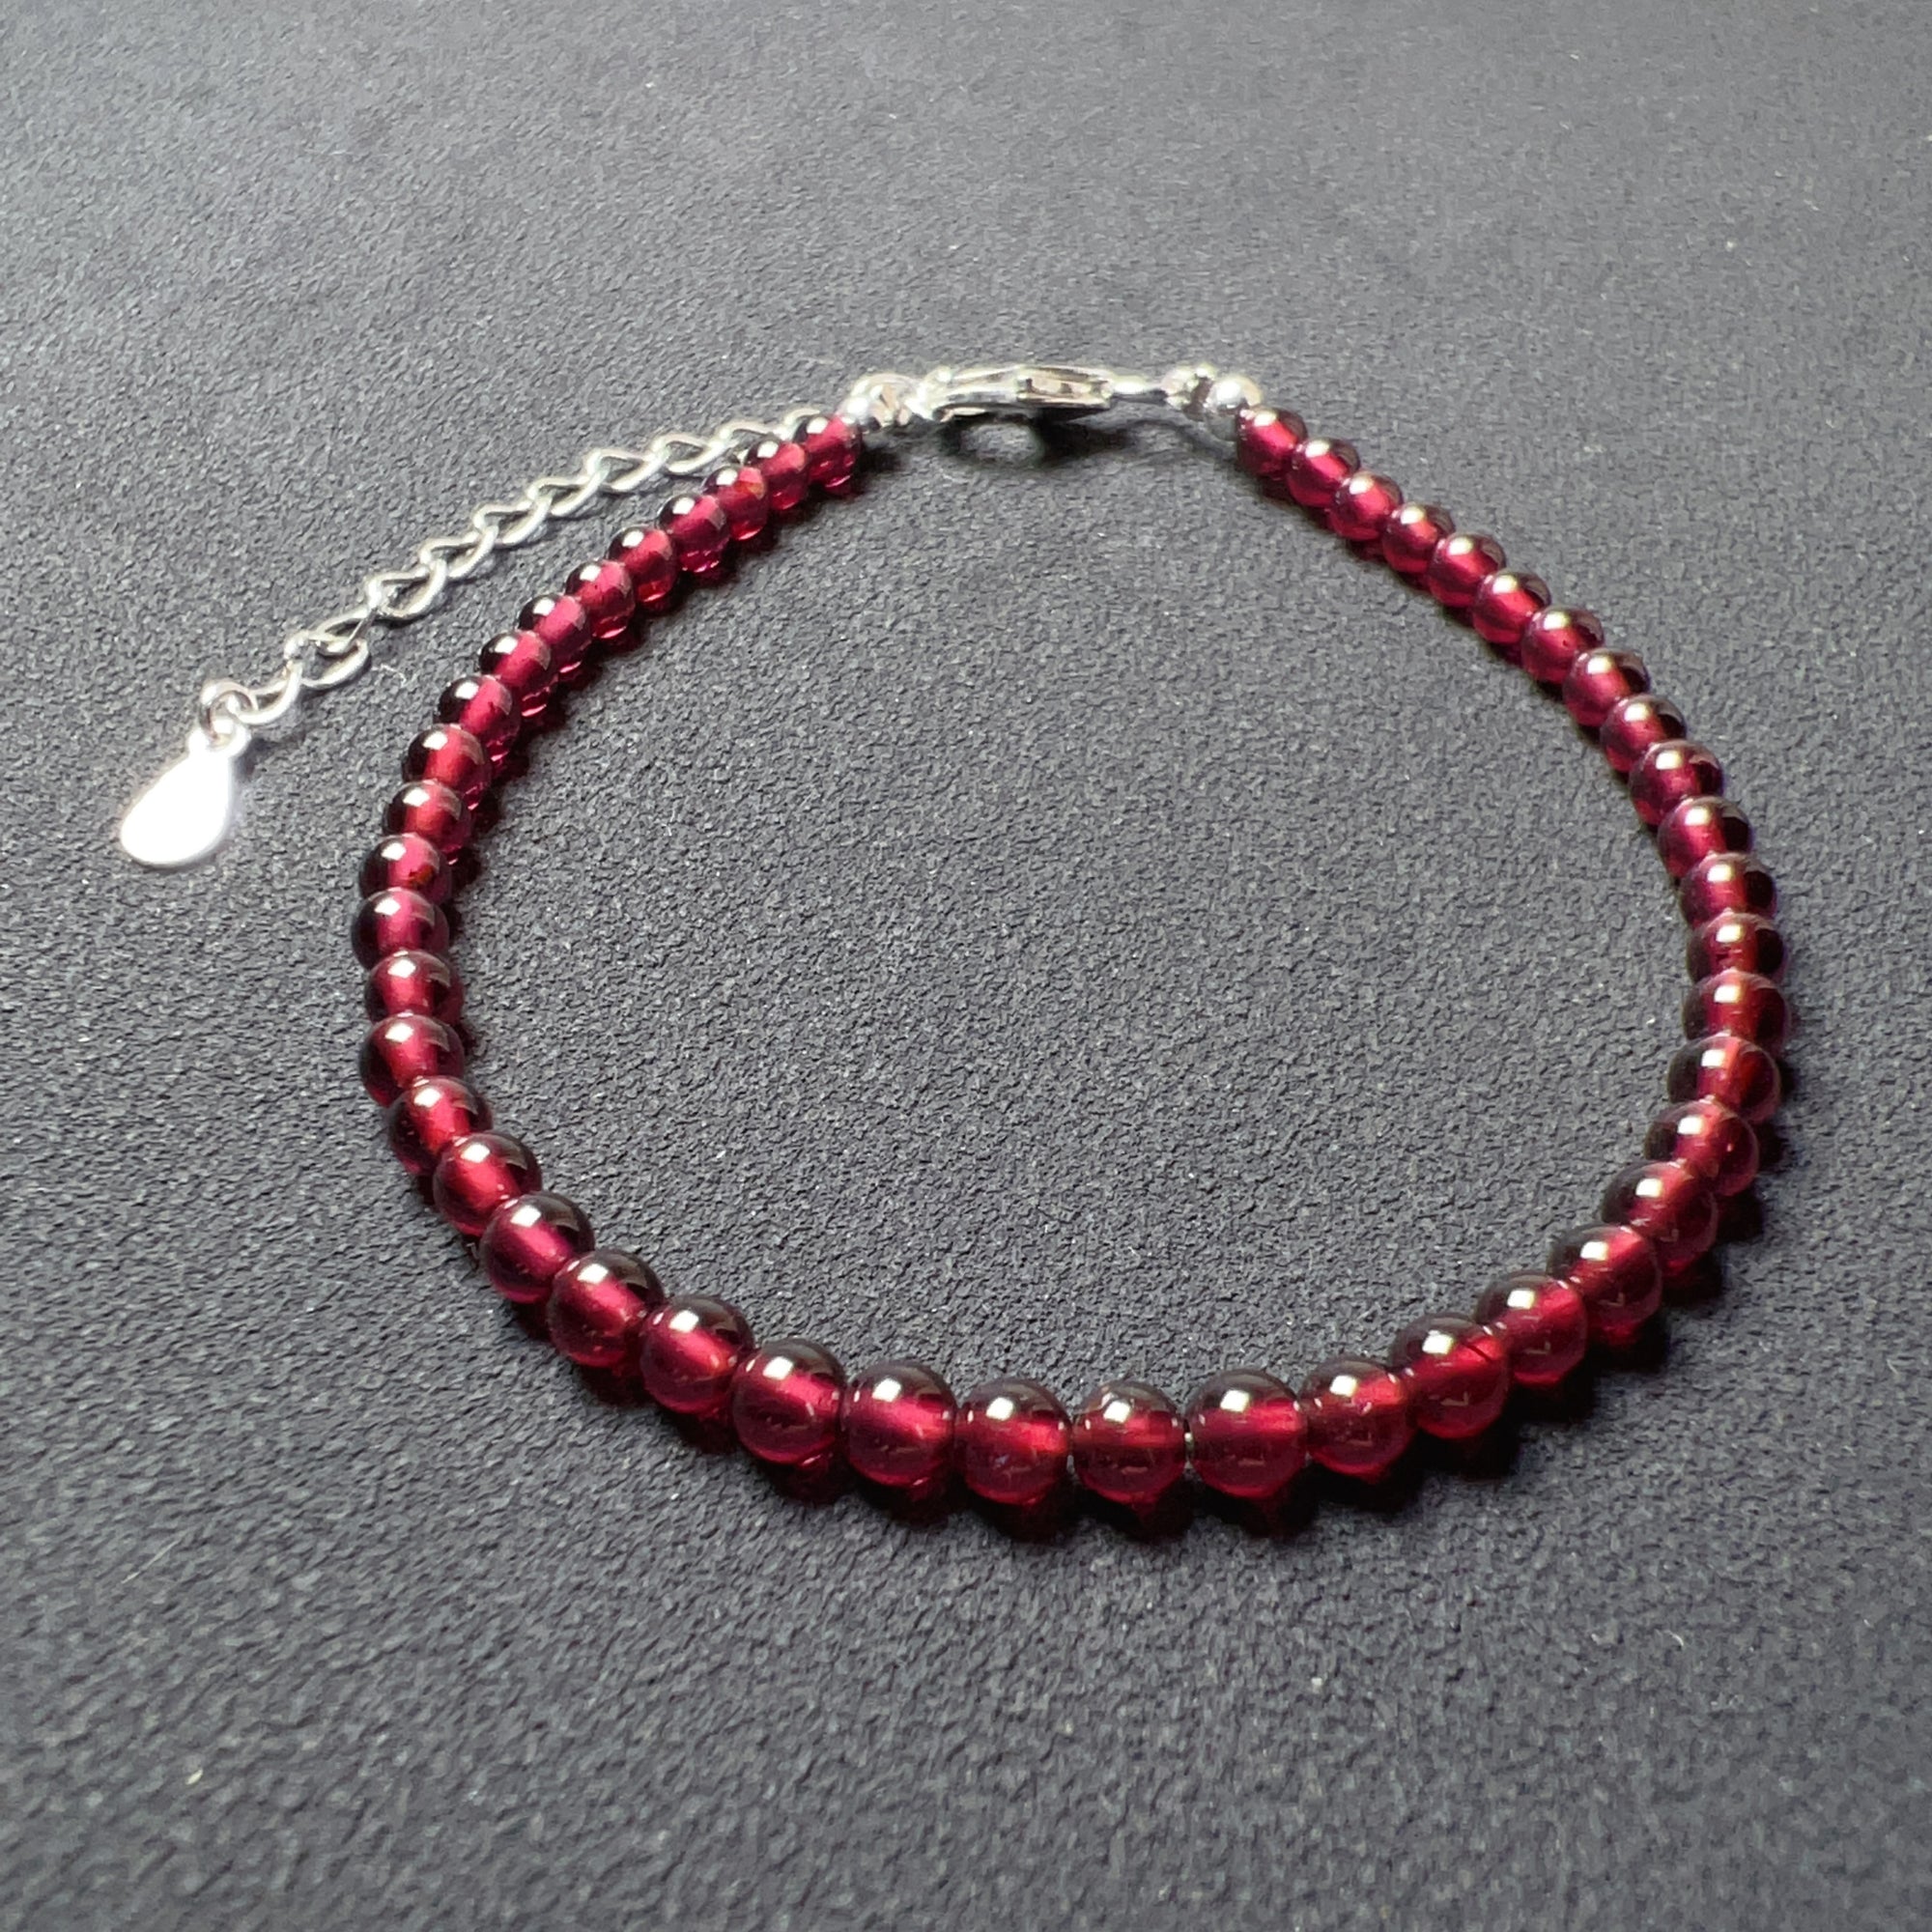 Crafted with care, this bracelet features natural, high-quality 3.5mm garnet beads, totaling 46 beads in all.